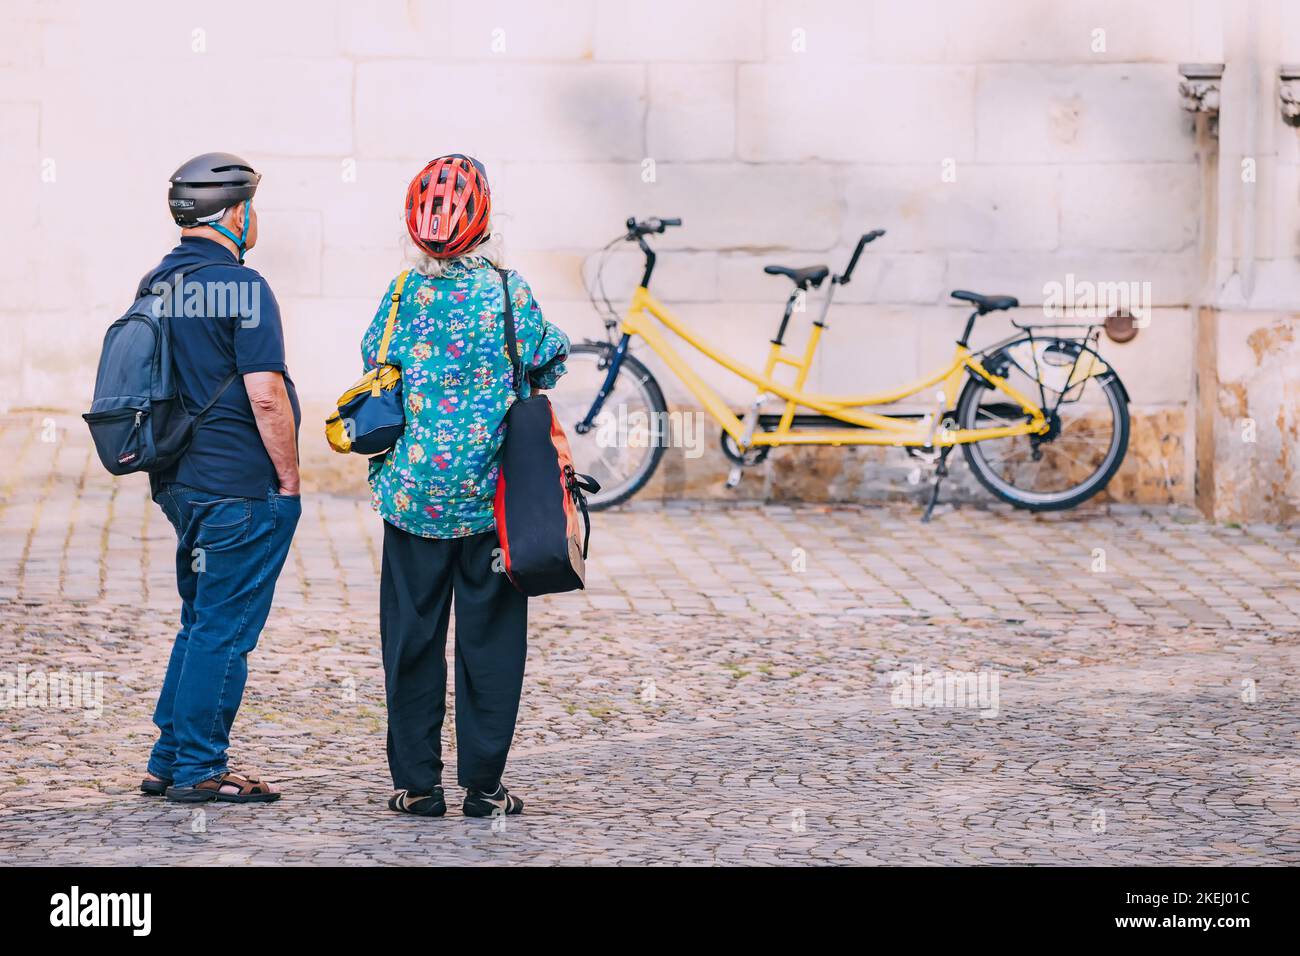 25 July 2022, Munster, Germany: An elderly senior couple arrived on a tandem bicycle and explore the sights of the old town Stock Photo